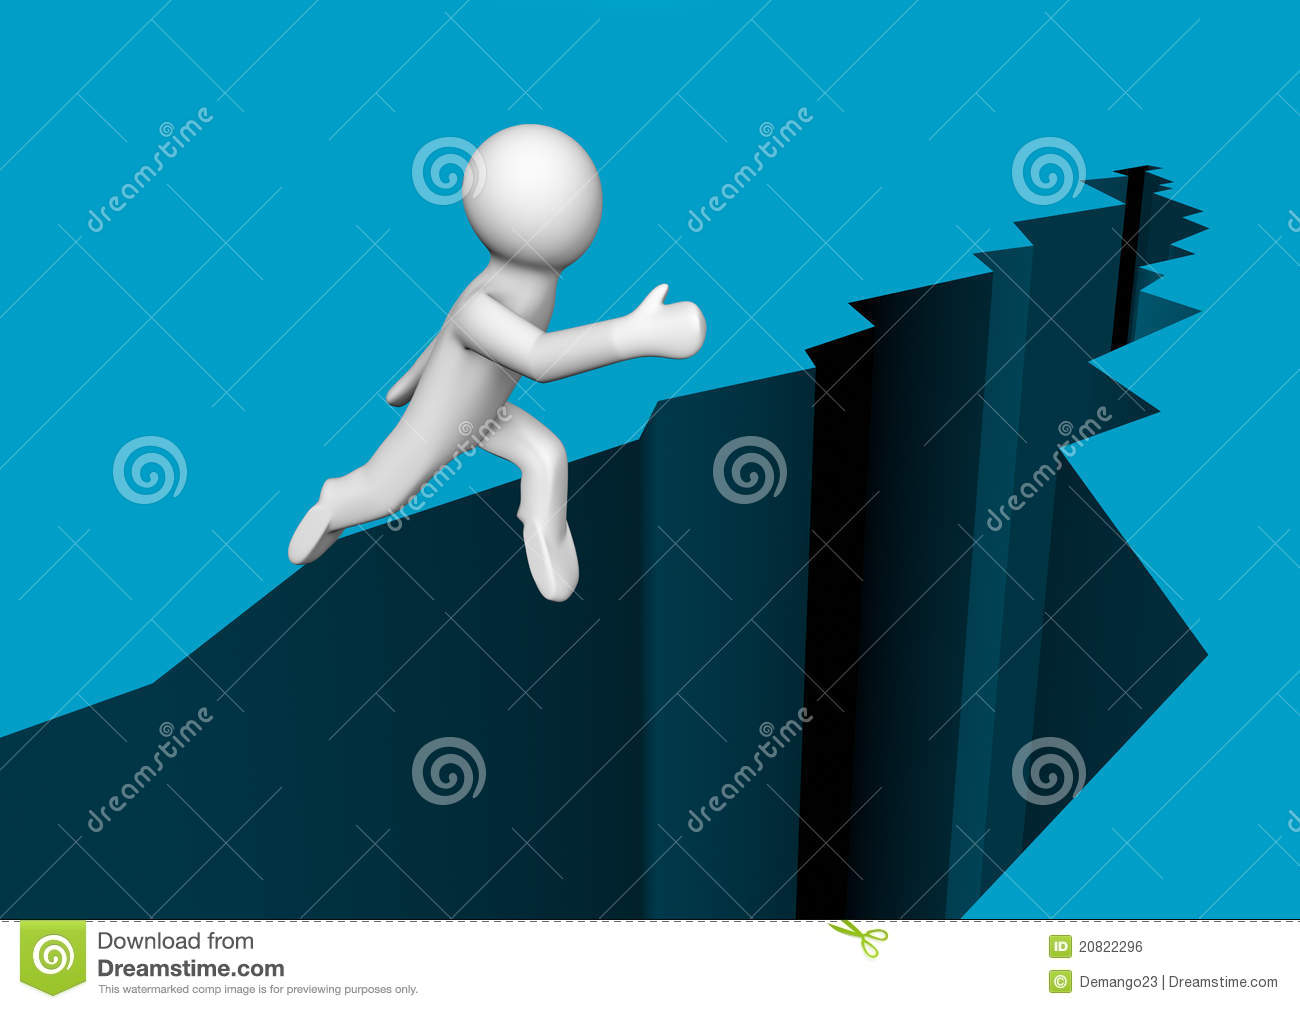 Leap Of Faith Royalty Free Stock Image   Image  20822296